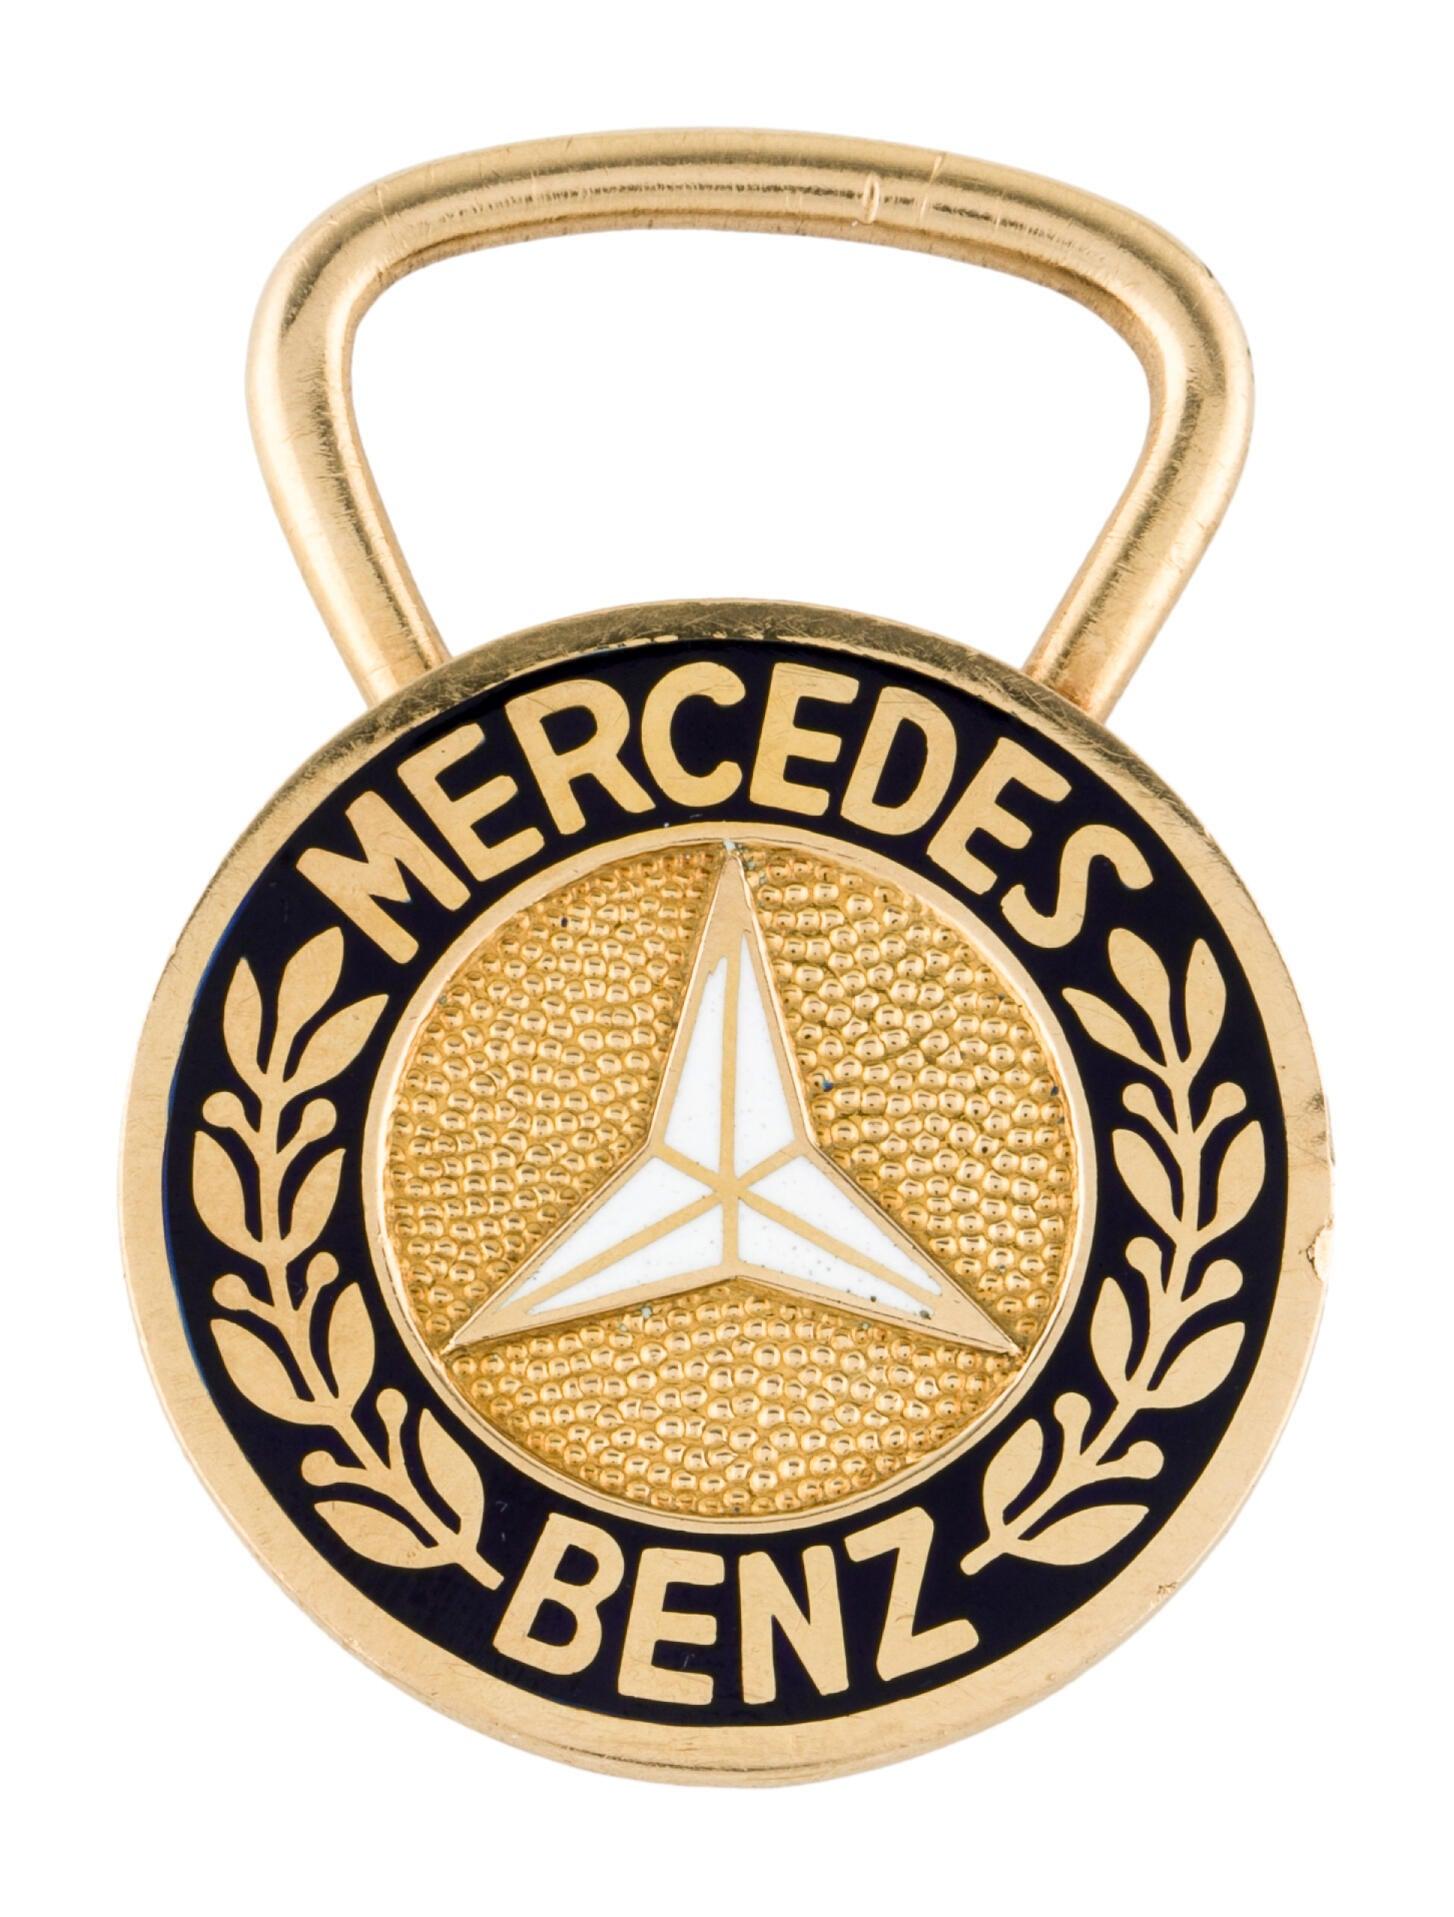 Bvlgari Italy 18k Yellow Gold & Enamel Mercedes Benz Padlock Pendant Keychain Vintage Circa 1970s

Here is your chance to purchase a beautiful and highly collectible designer padlock pendant.  Truly a great piece at a great price! 

Metal Type: 18K